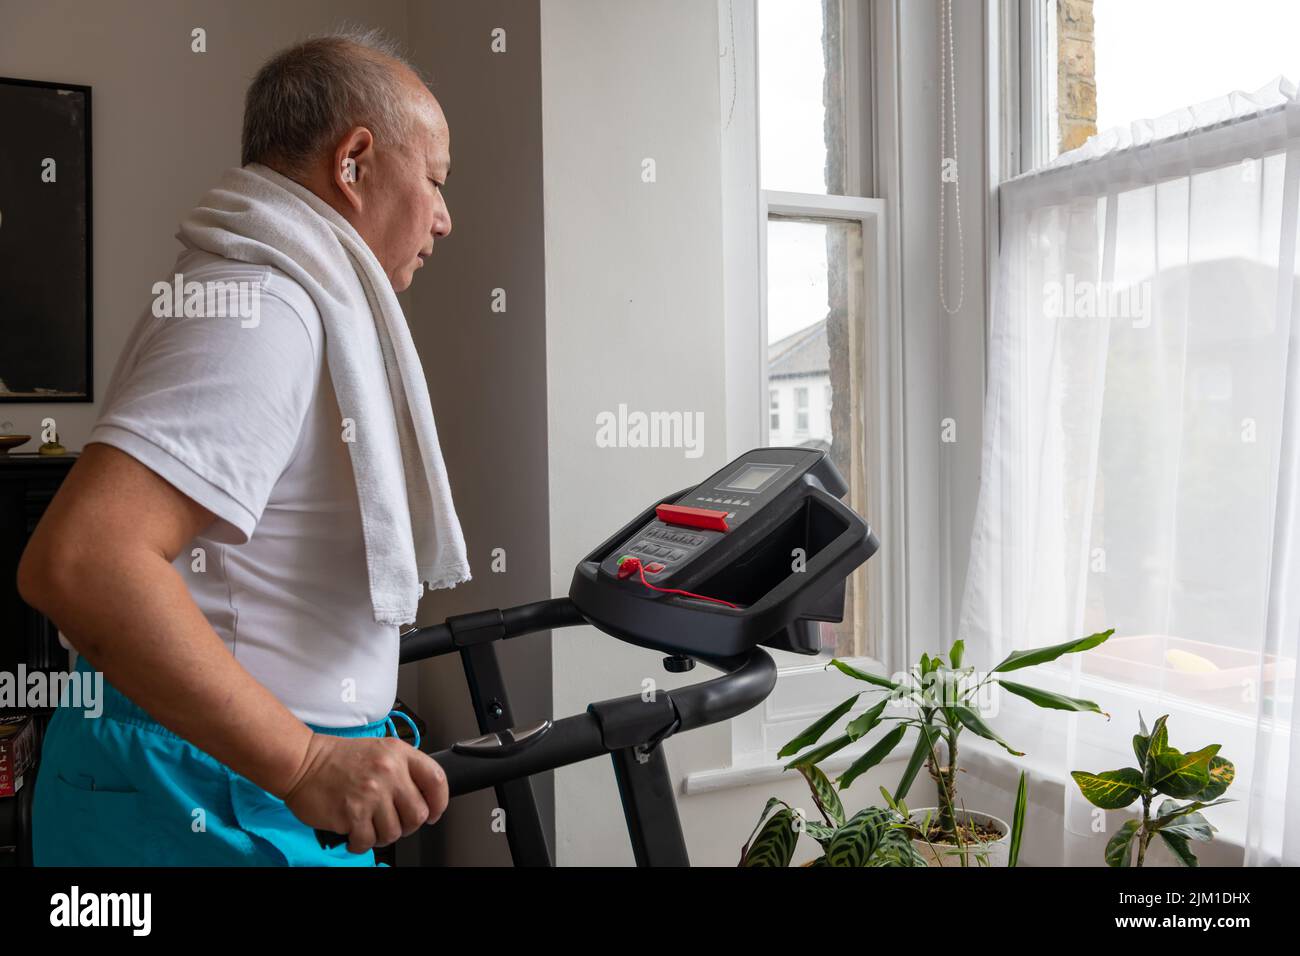 A senior man trying to keep fit working out on a treadmill at home. Stock Photo